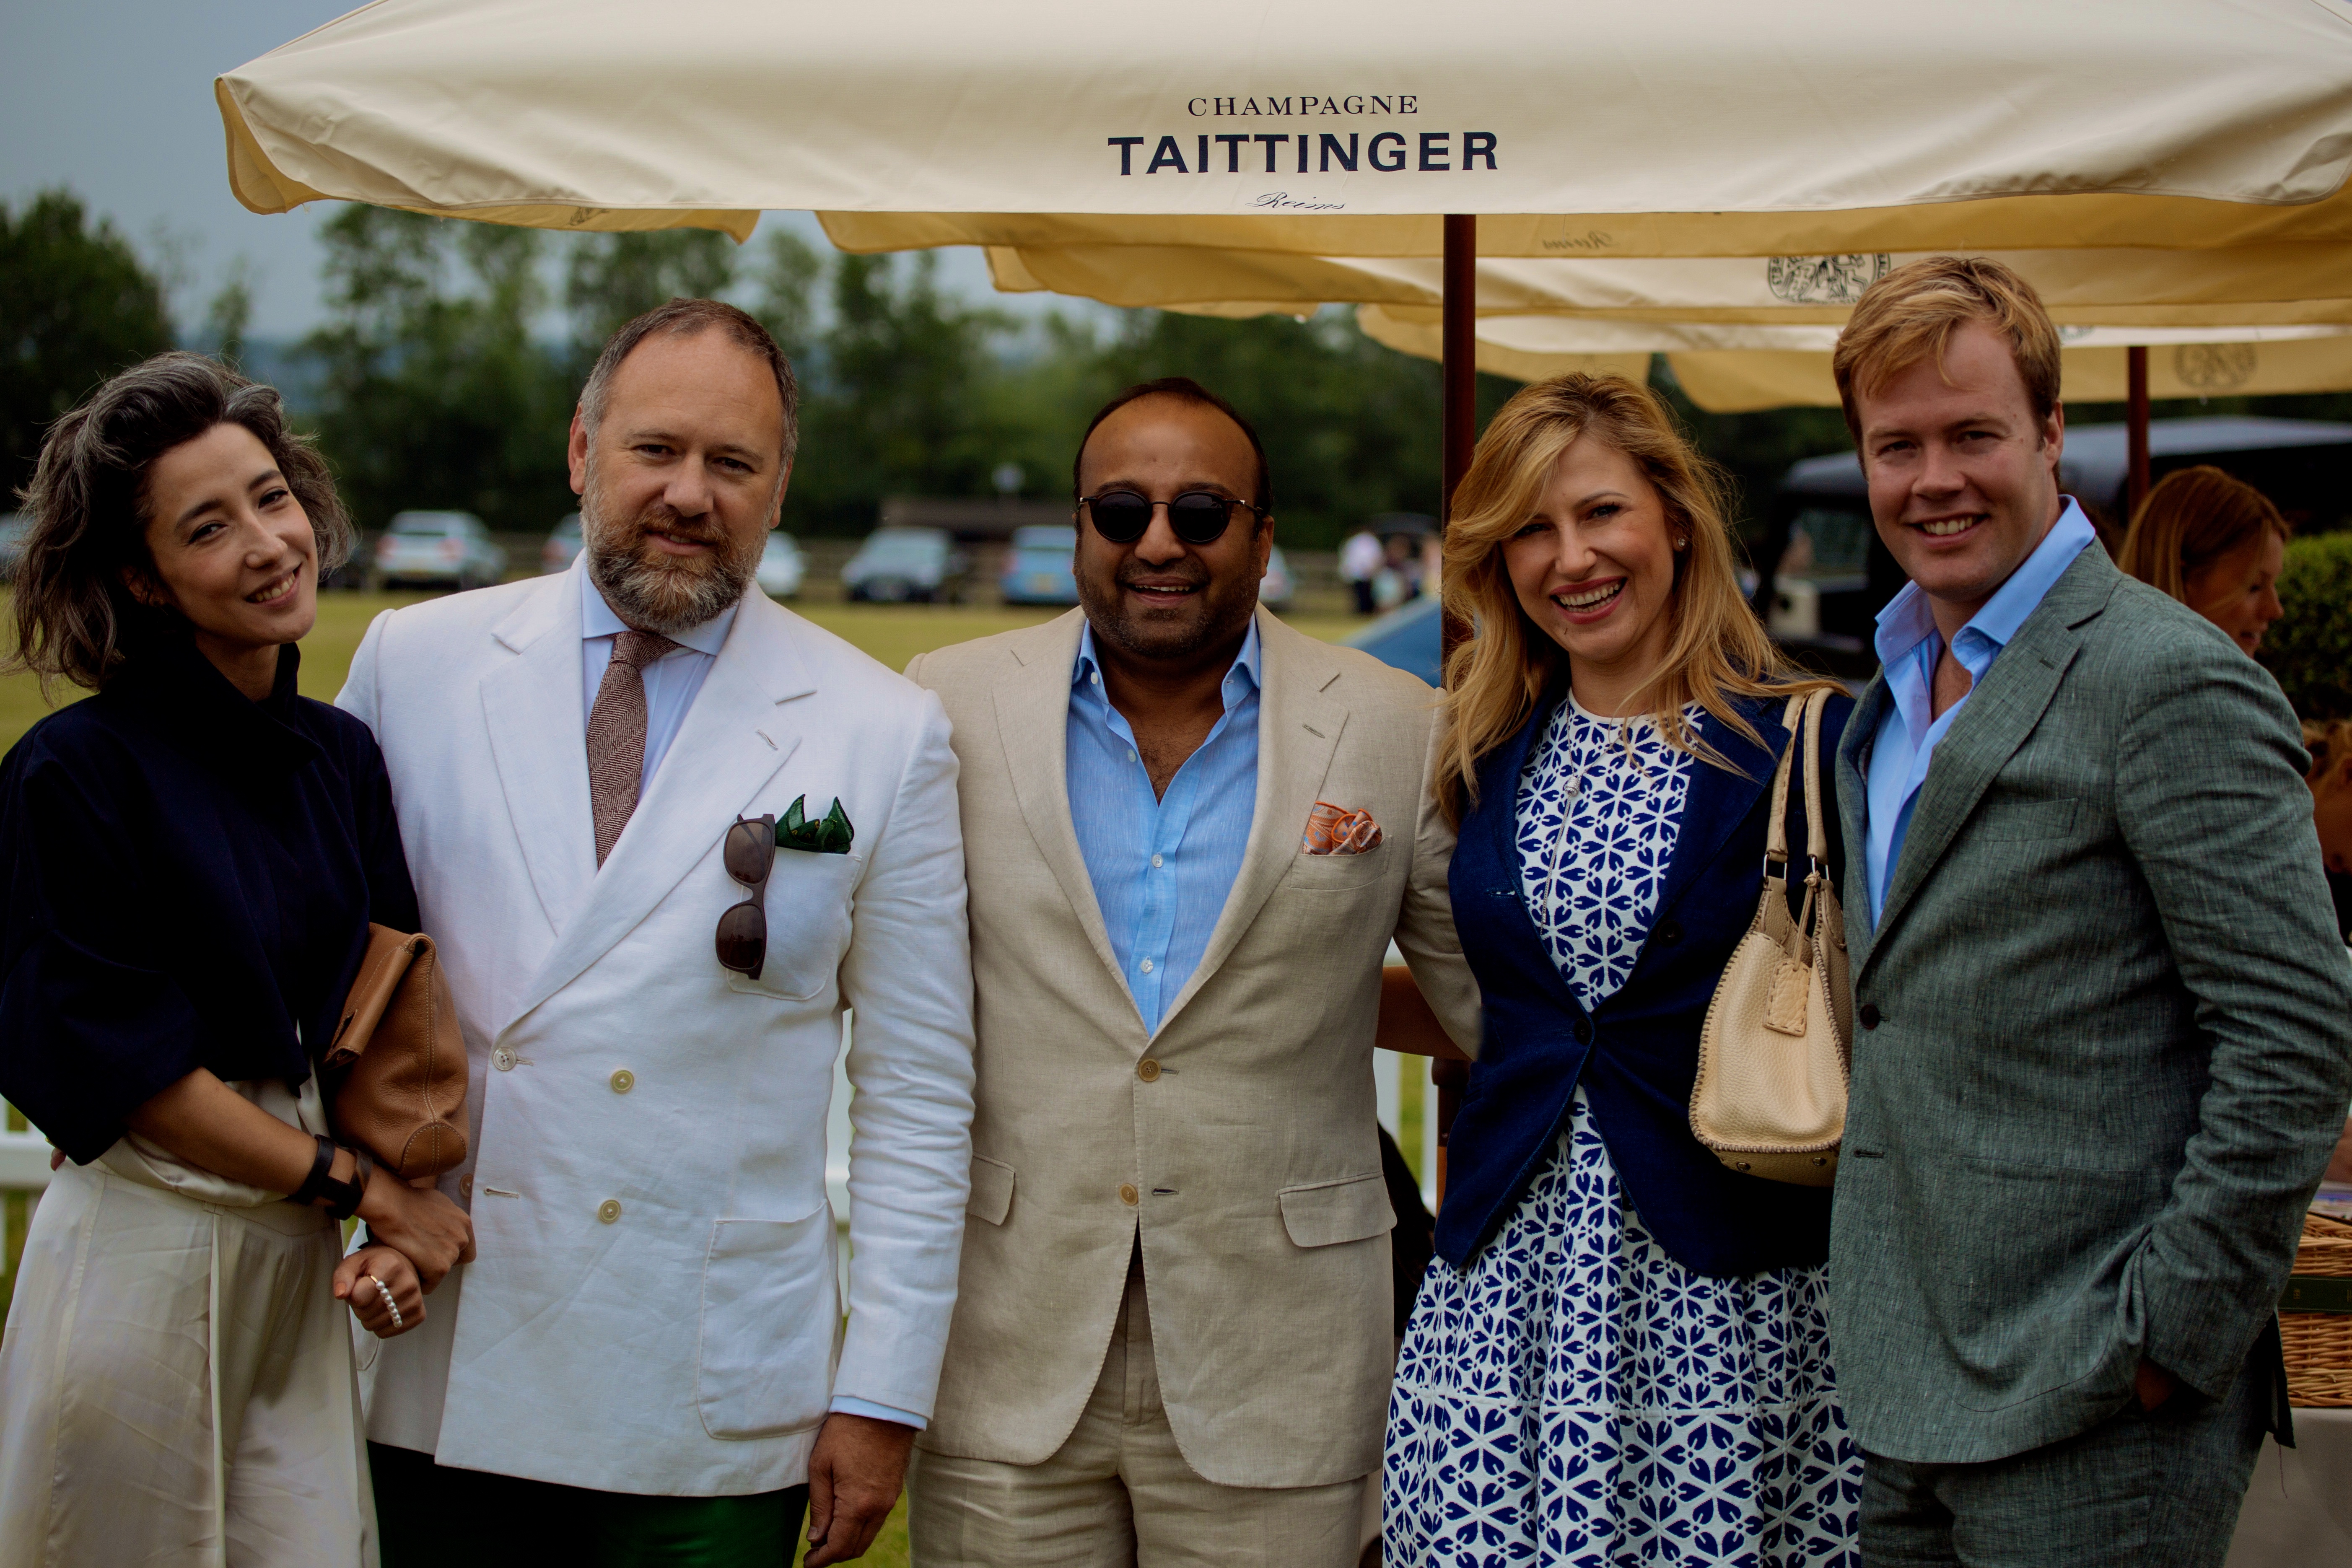 From the left, Mimi Durand Kurihara, David Leppan, Chairman of Wealth-X and the founder of World-Check, Ron Wahid, CEO of RJI Capital, his fiancée, art consultant Magdalena Kruszewska and Ed Olver, CEO of British Polo Day at the event held on June 20 in Henley-on-Thames.